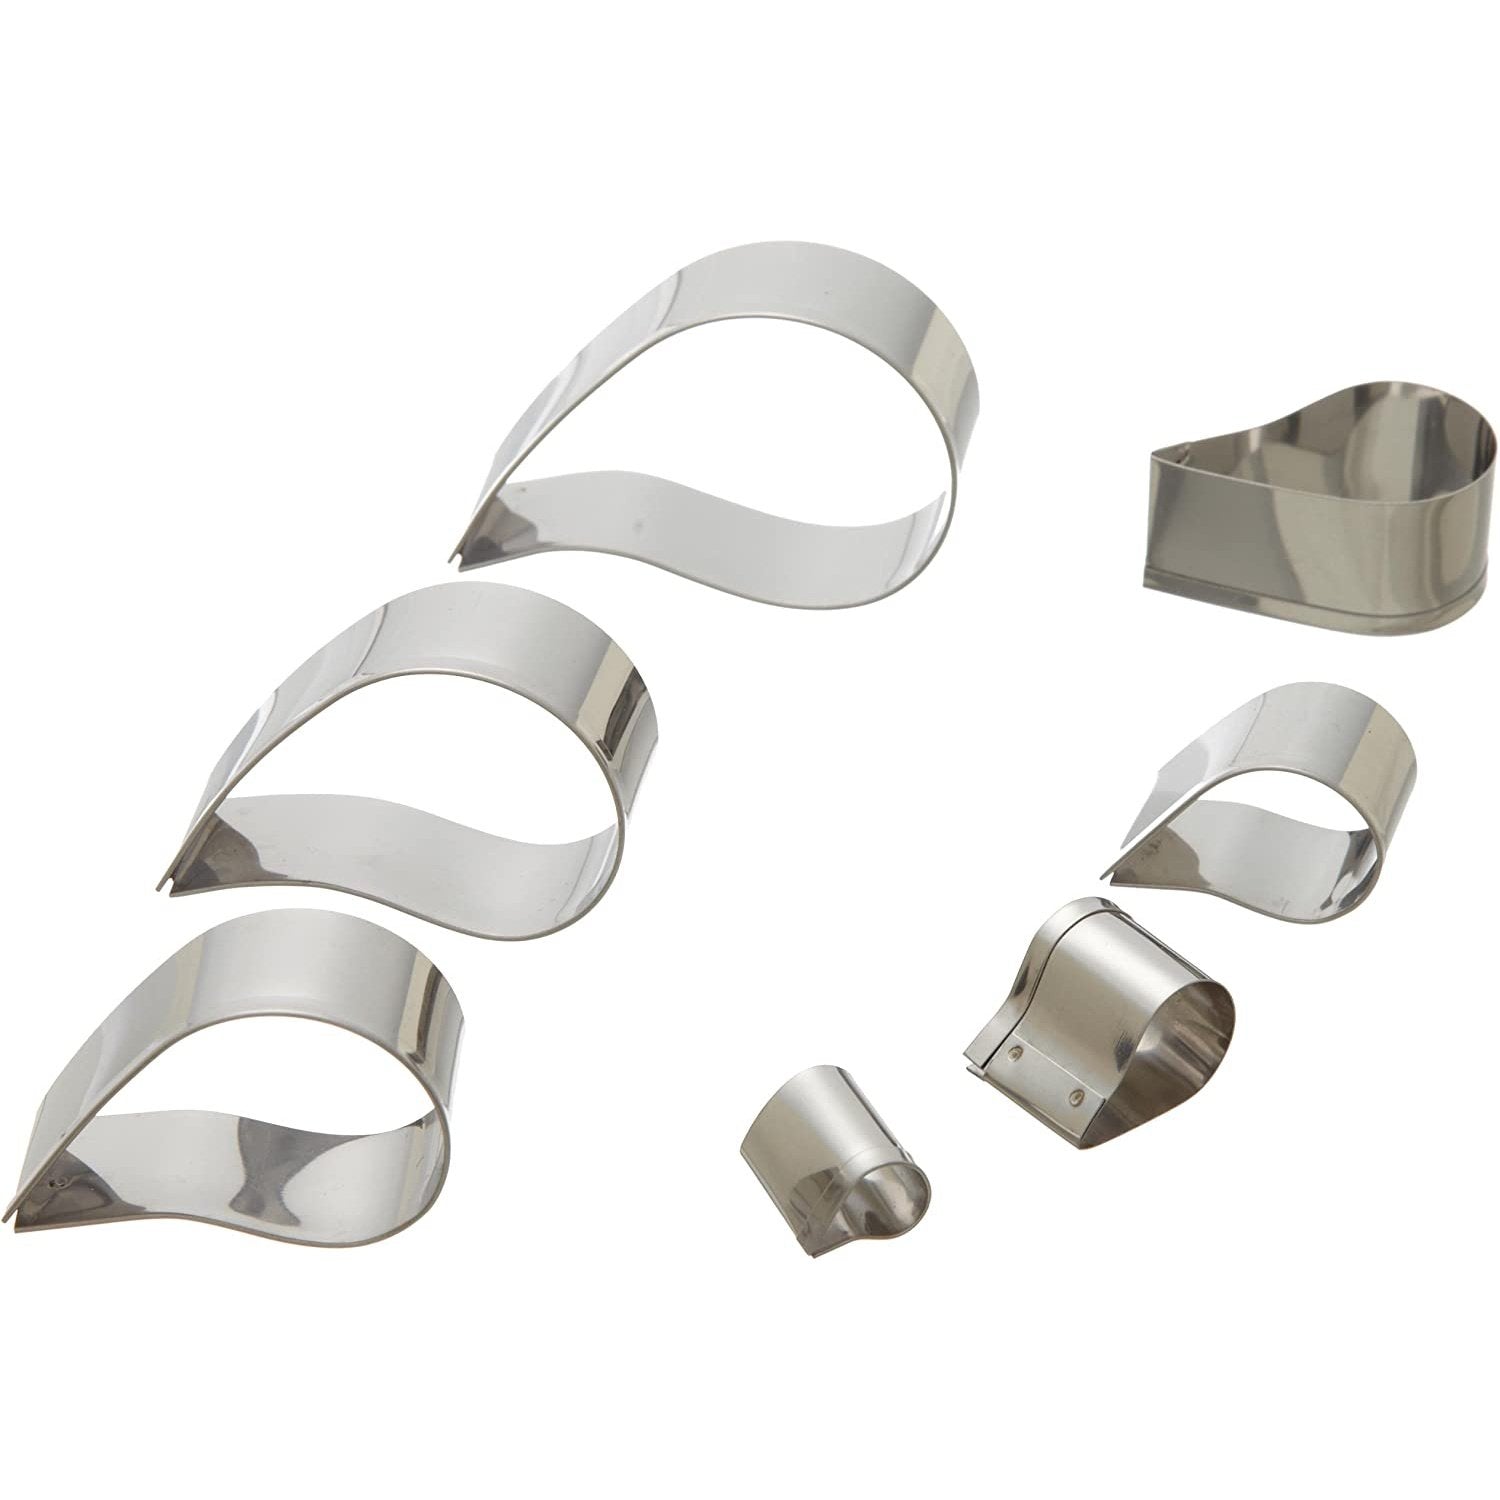 Ateco Fluted Edge Tear Drop Cutters in Graduated Sizes, Stainless Steel, 5 Pc Set